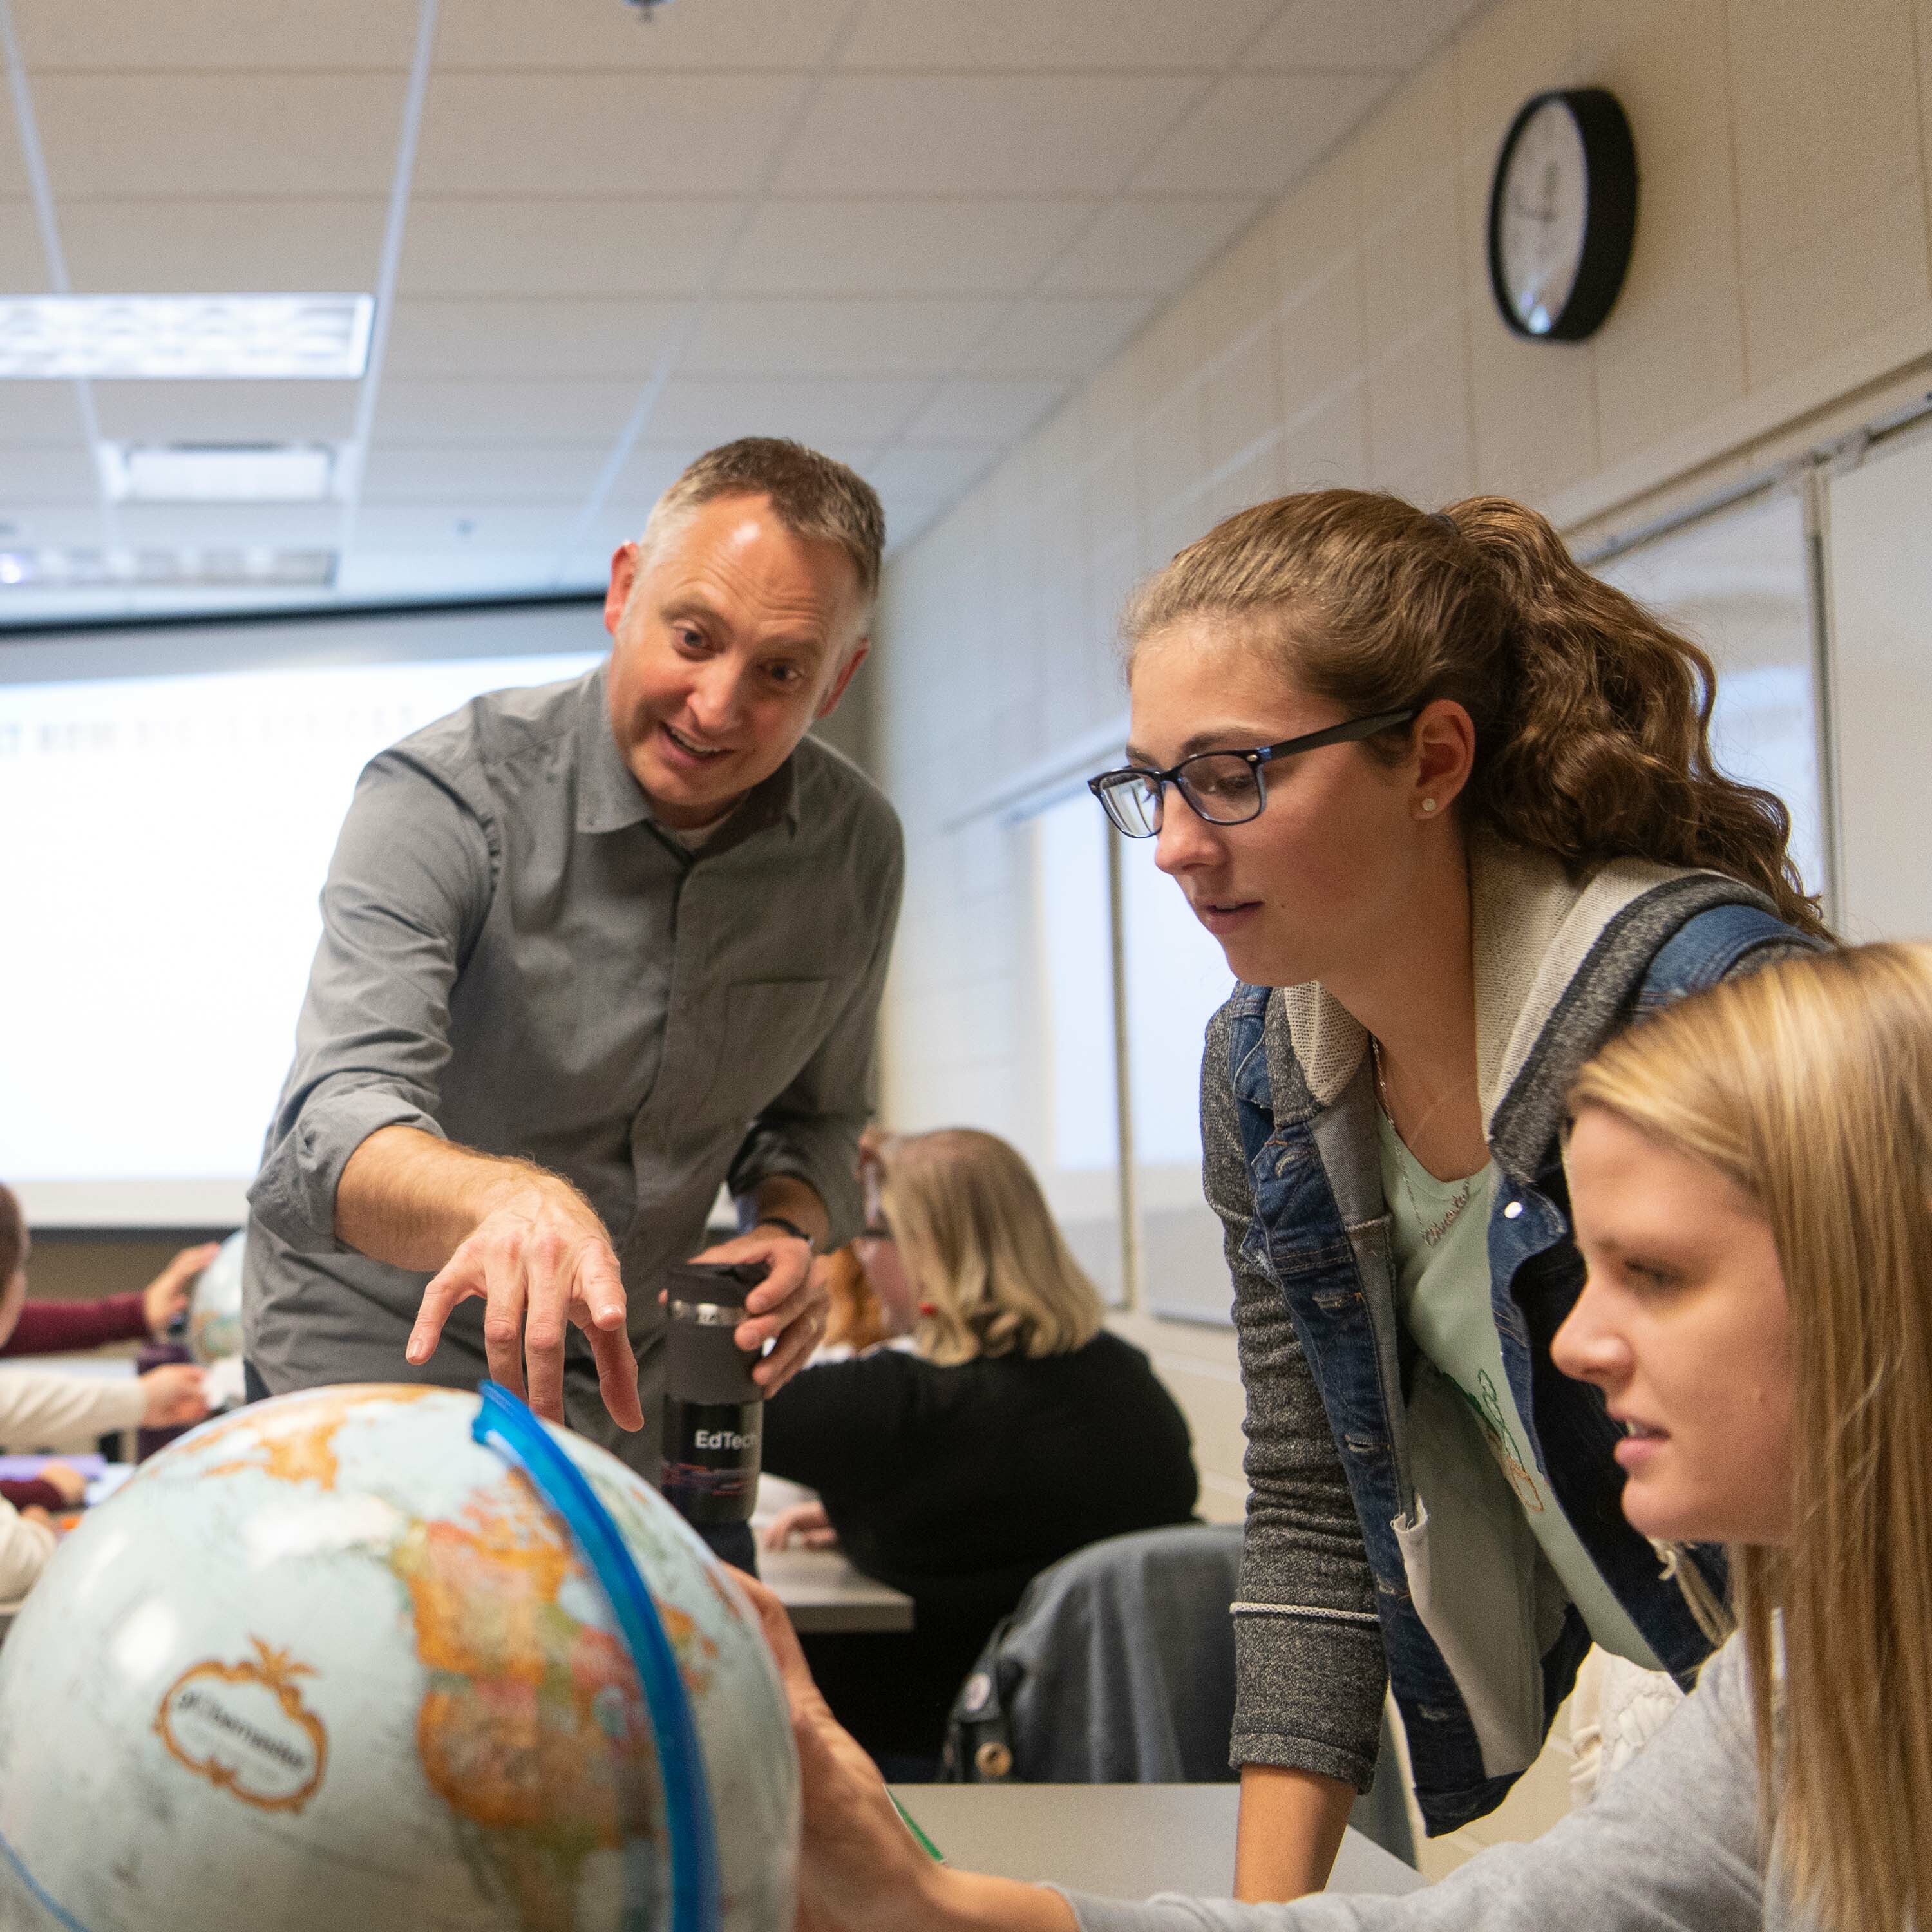 Dr. Mulder points to a globe as two students look on